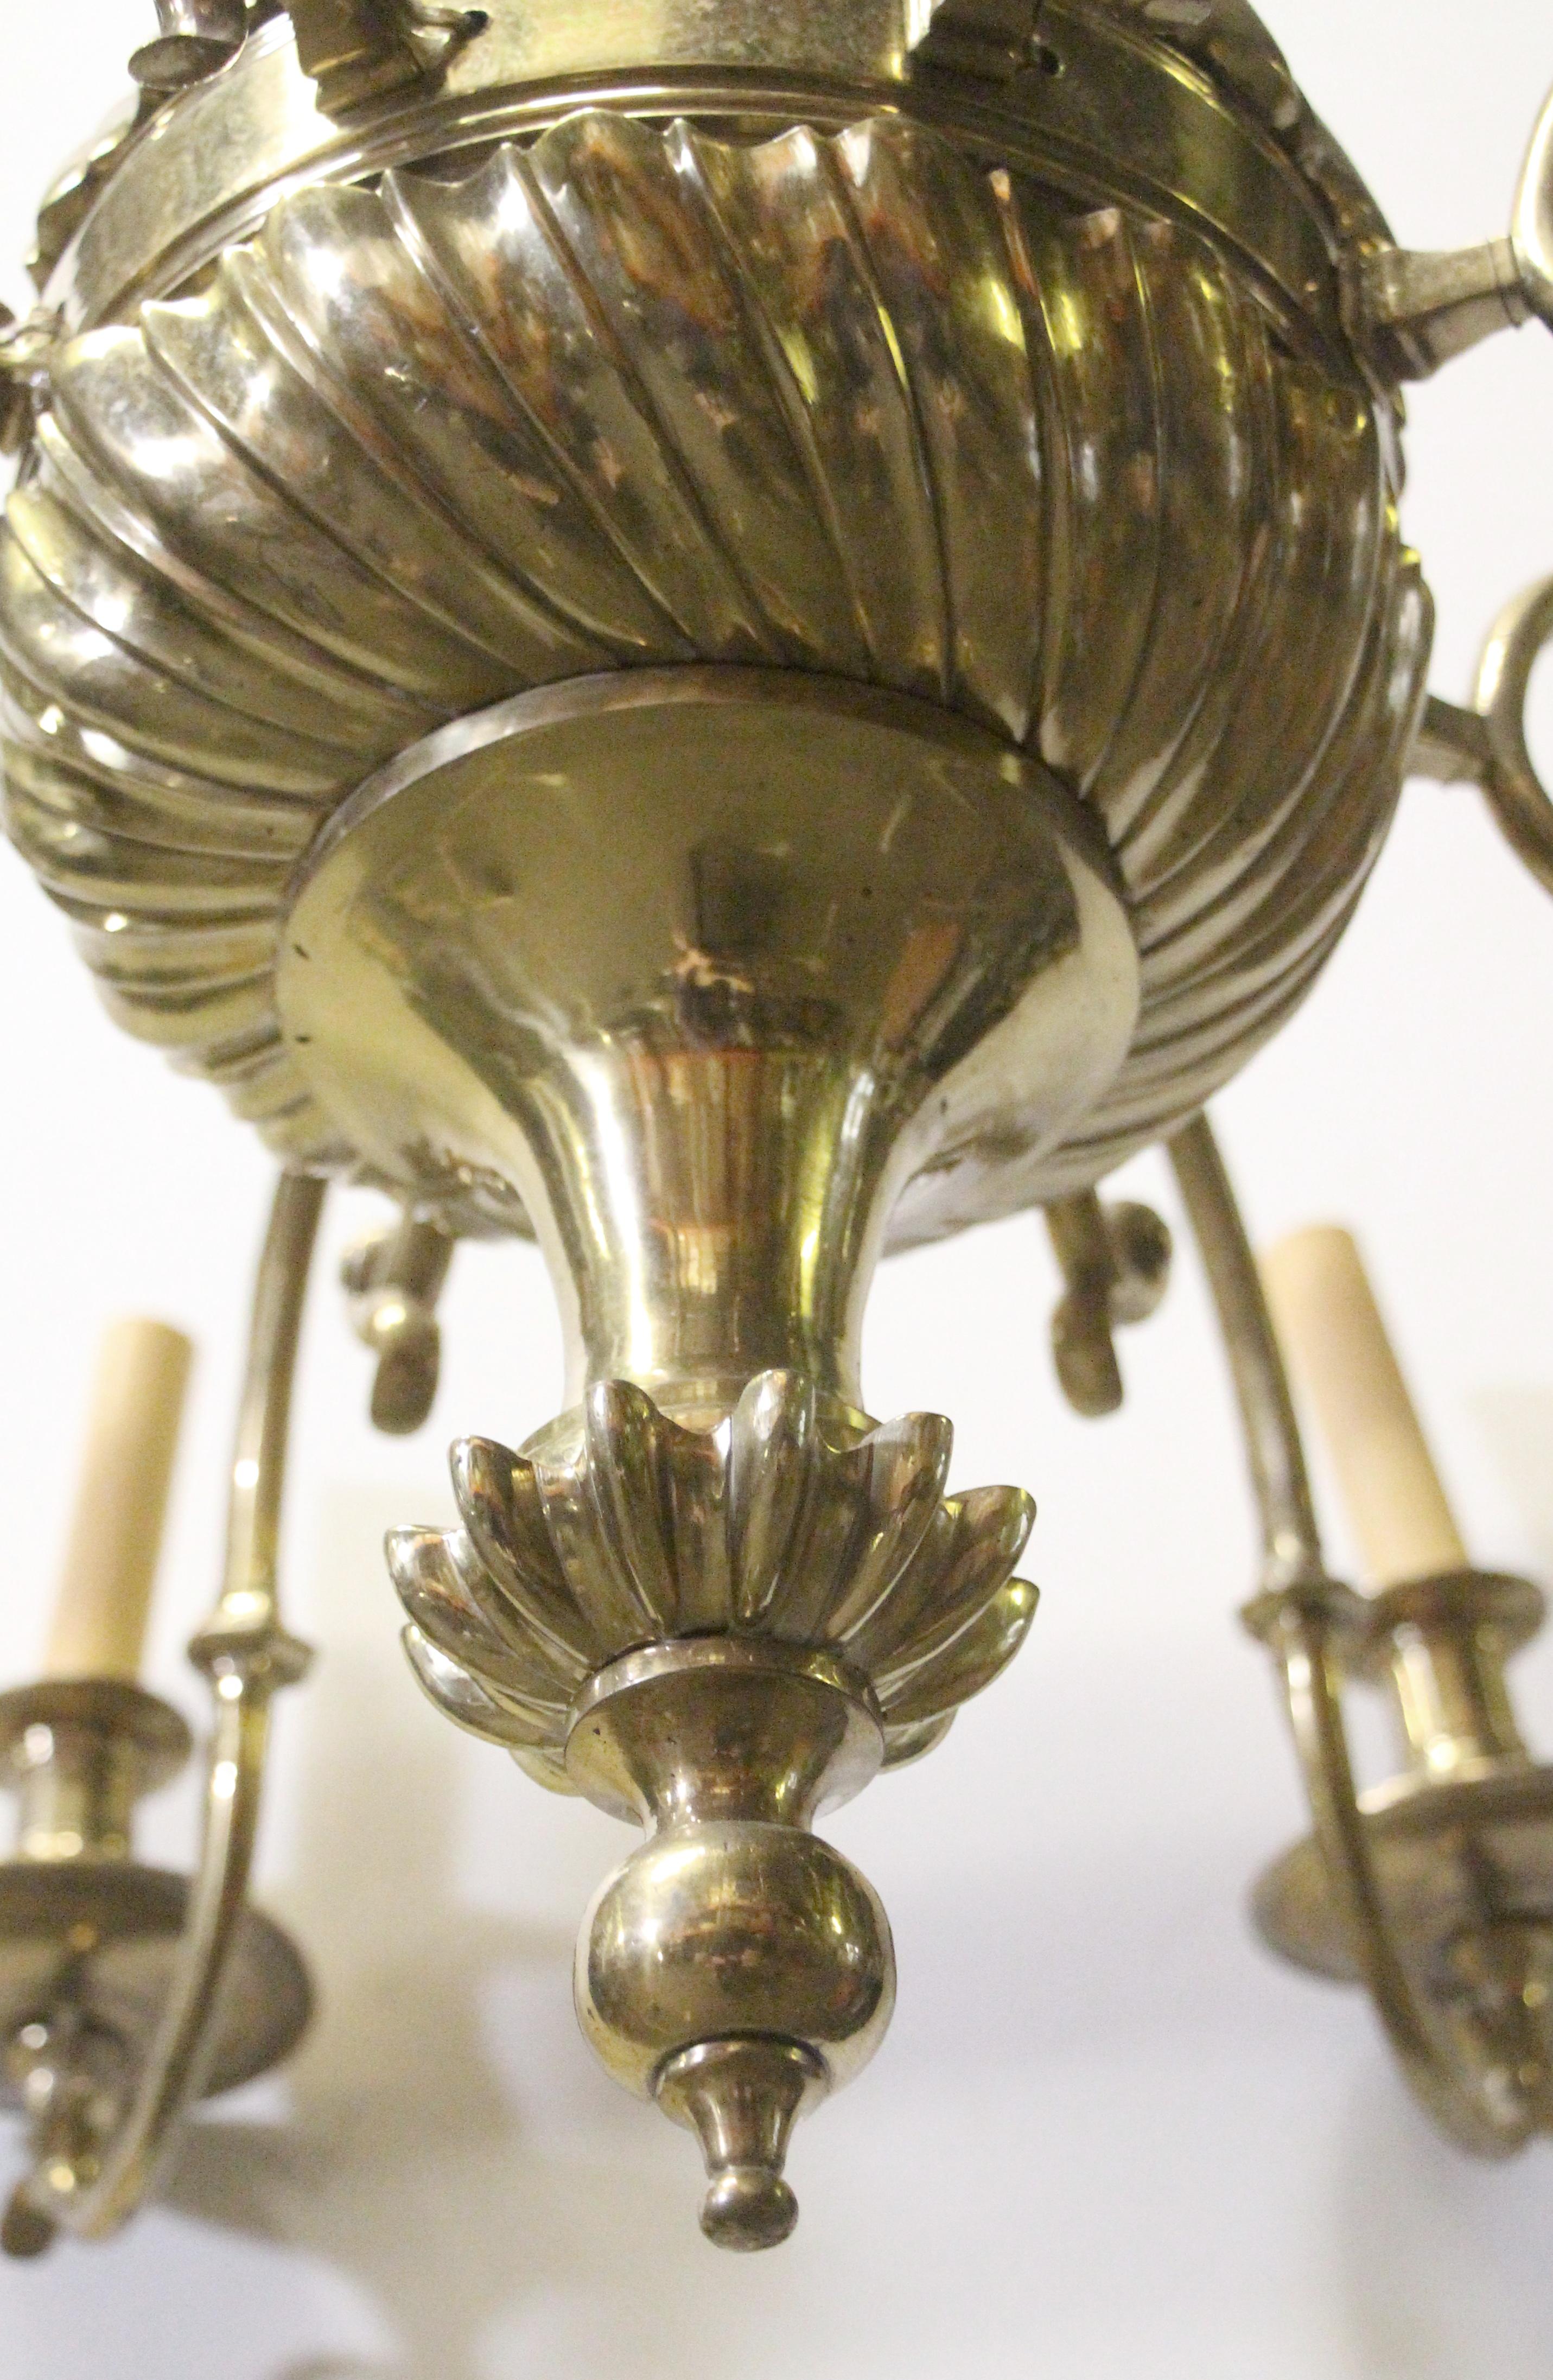 Early 1900s Brass 8-Arm Chandelier from NYC Stock Exchange w/ Eagle Finial 7